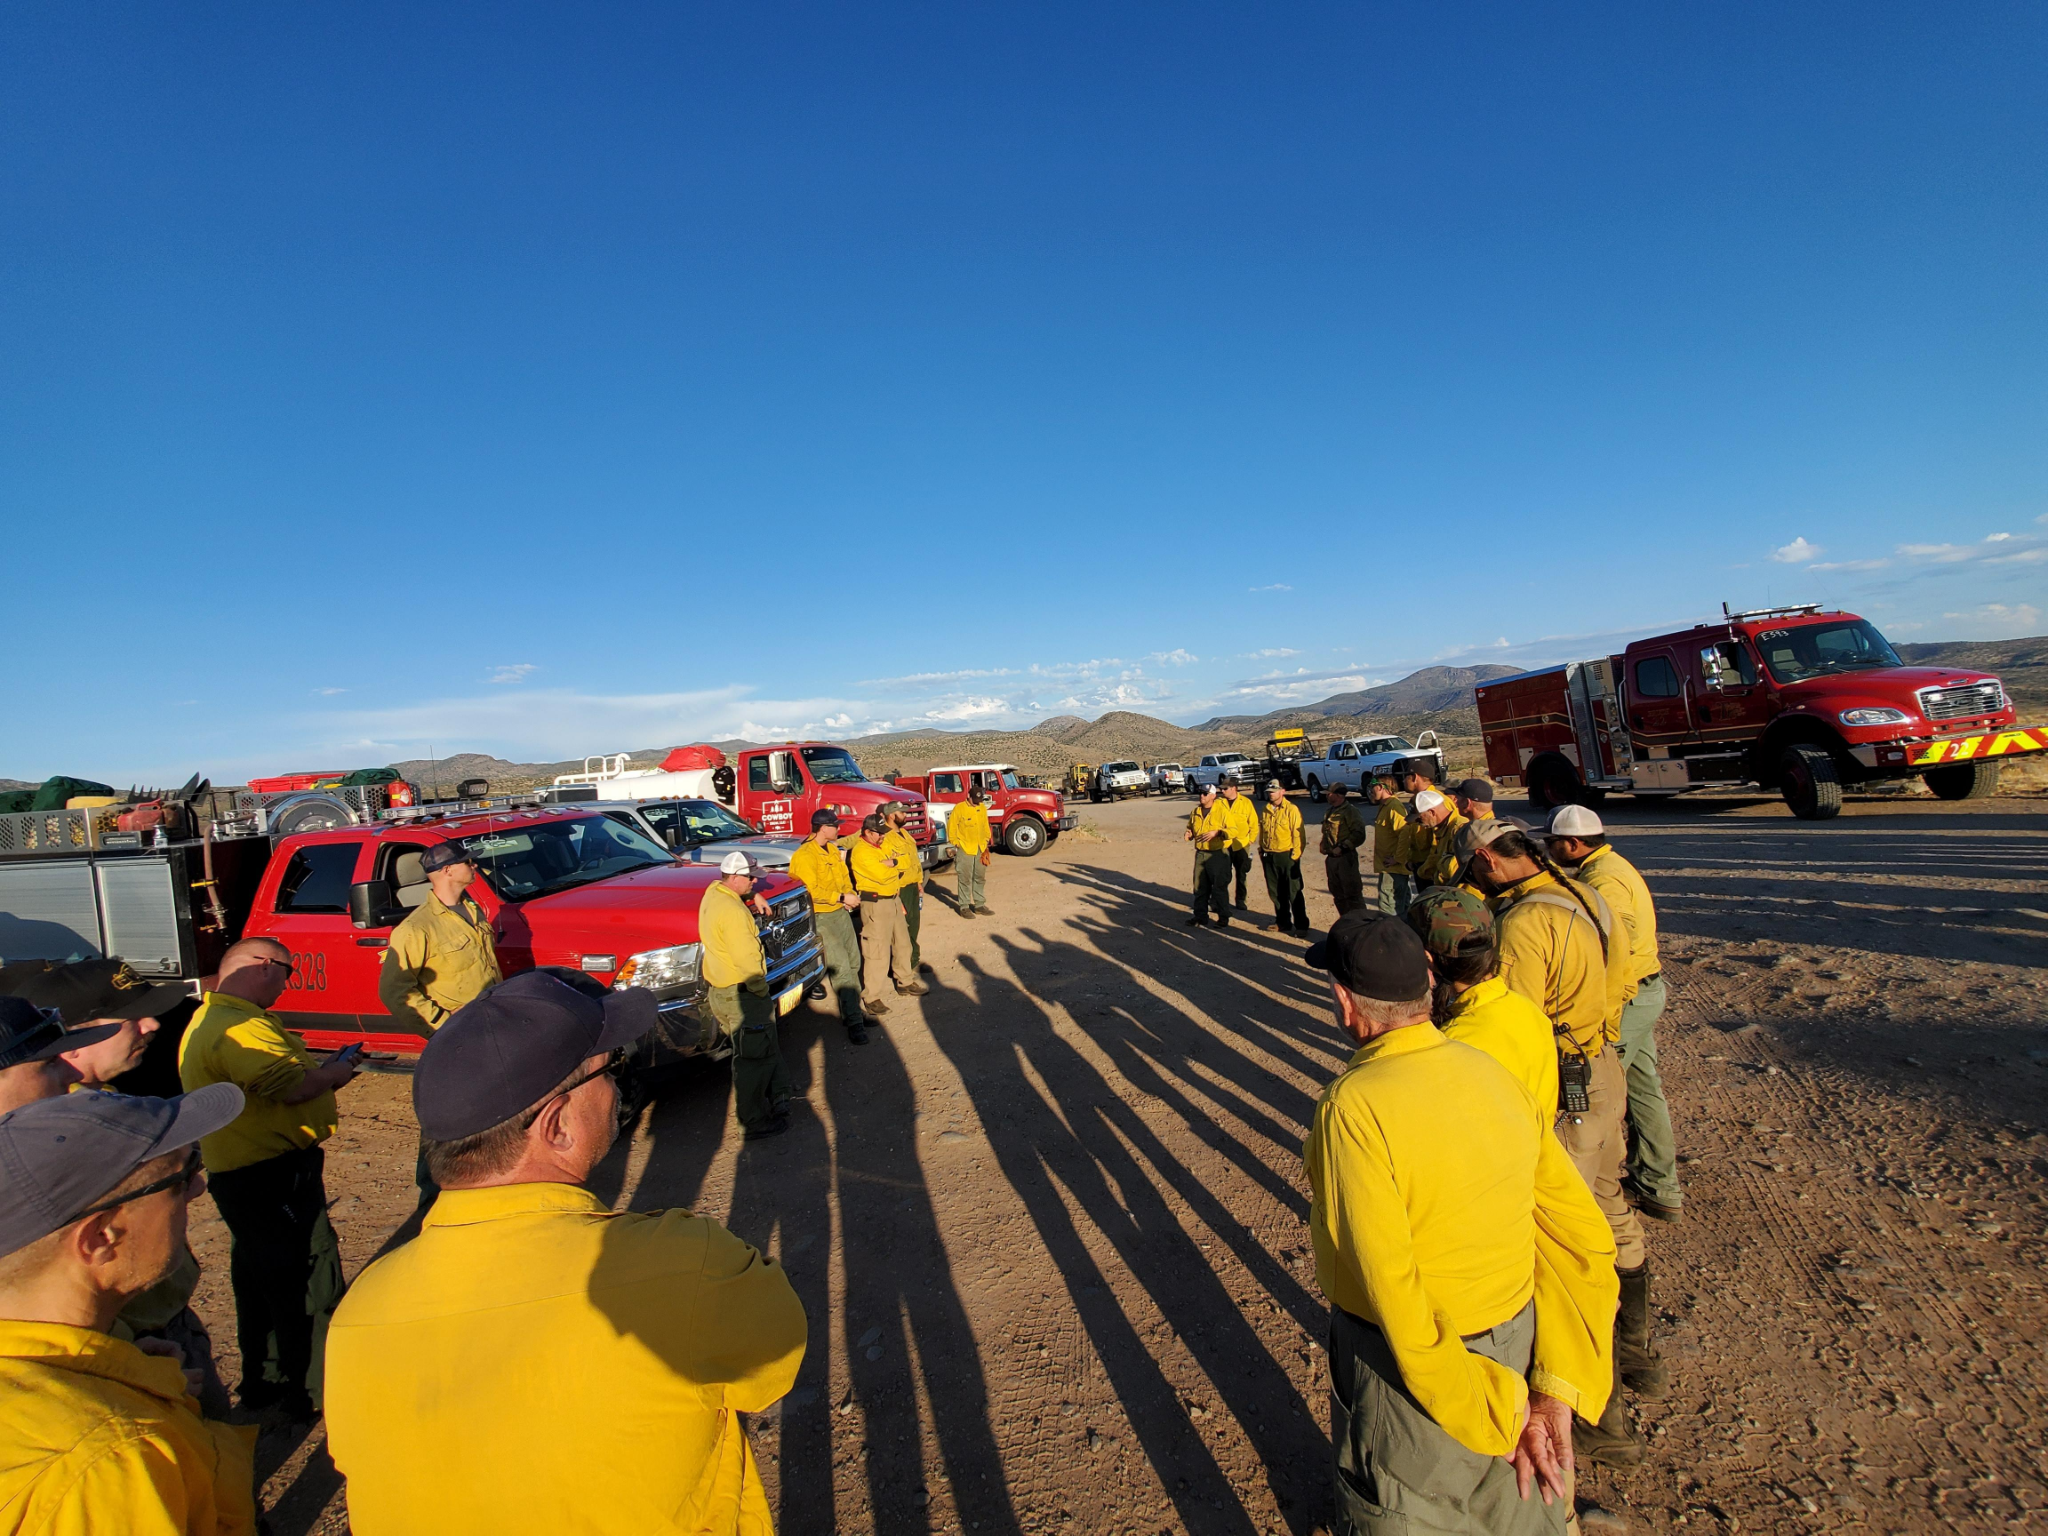 A division of the Type 1 Incident Management Team meeting for the Backbone Fire